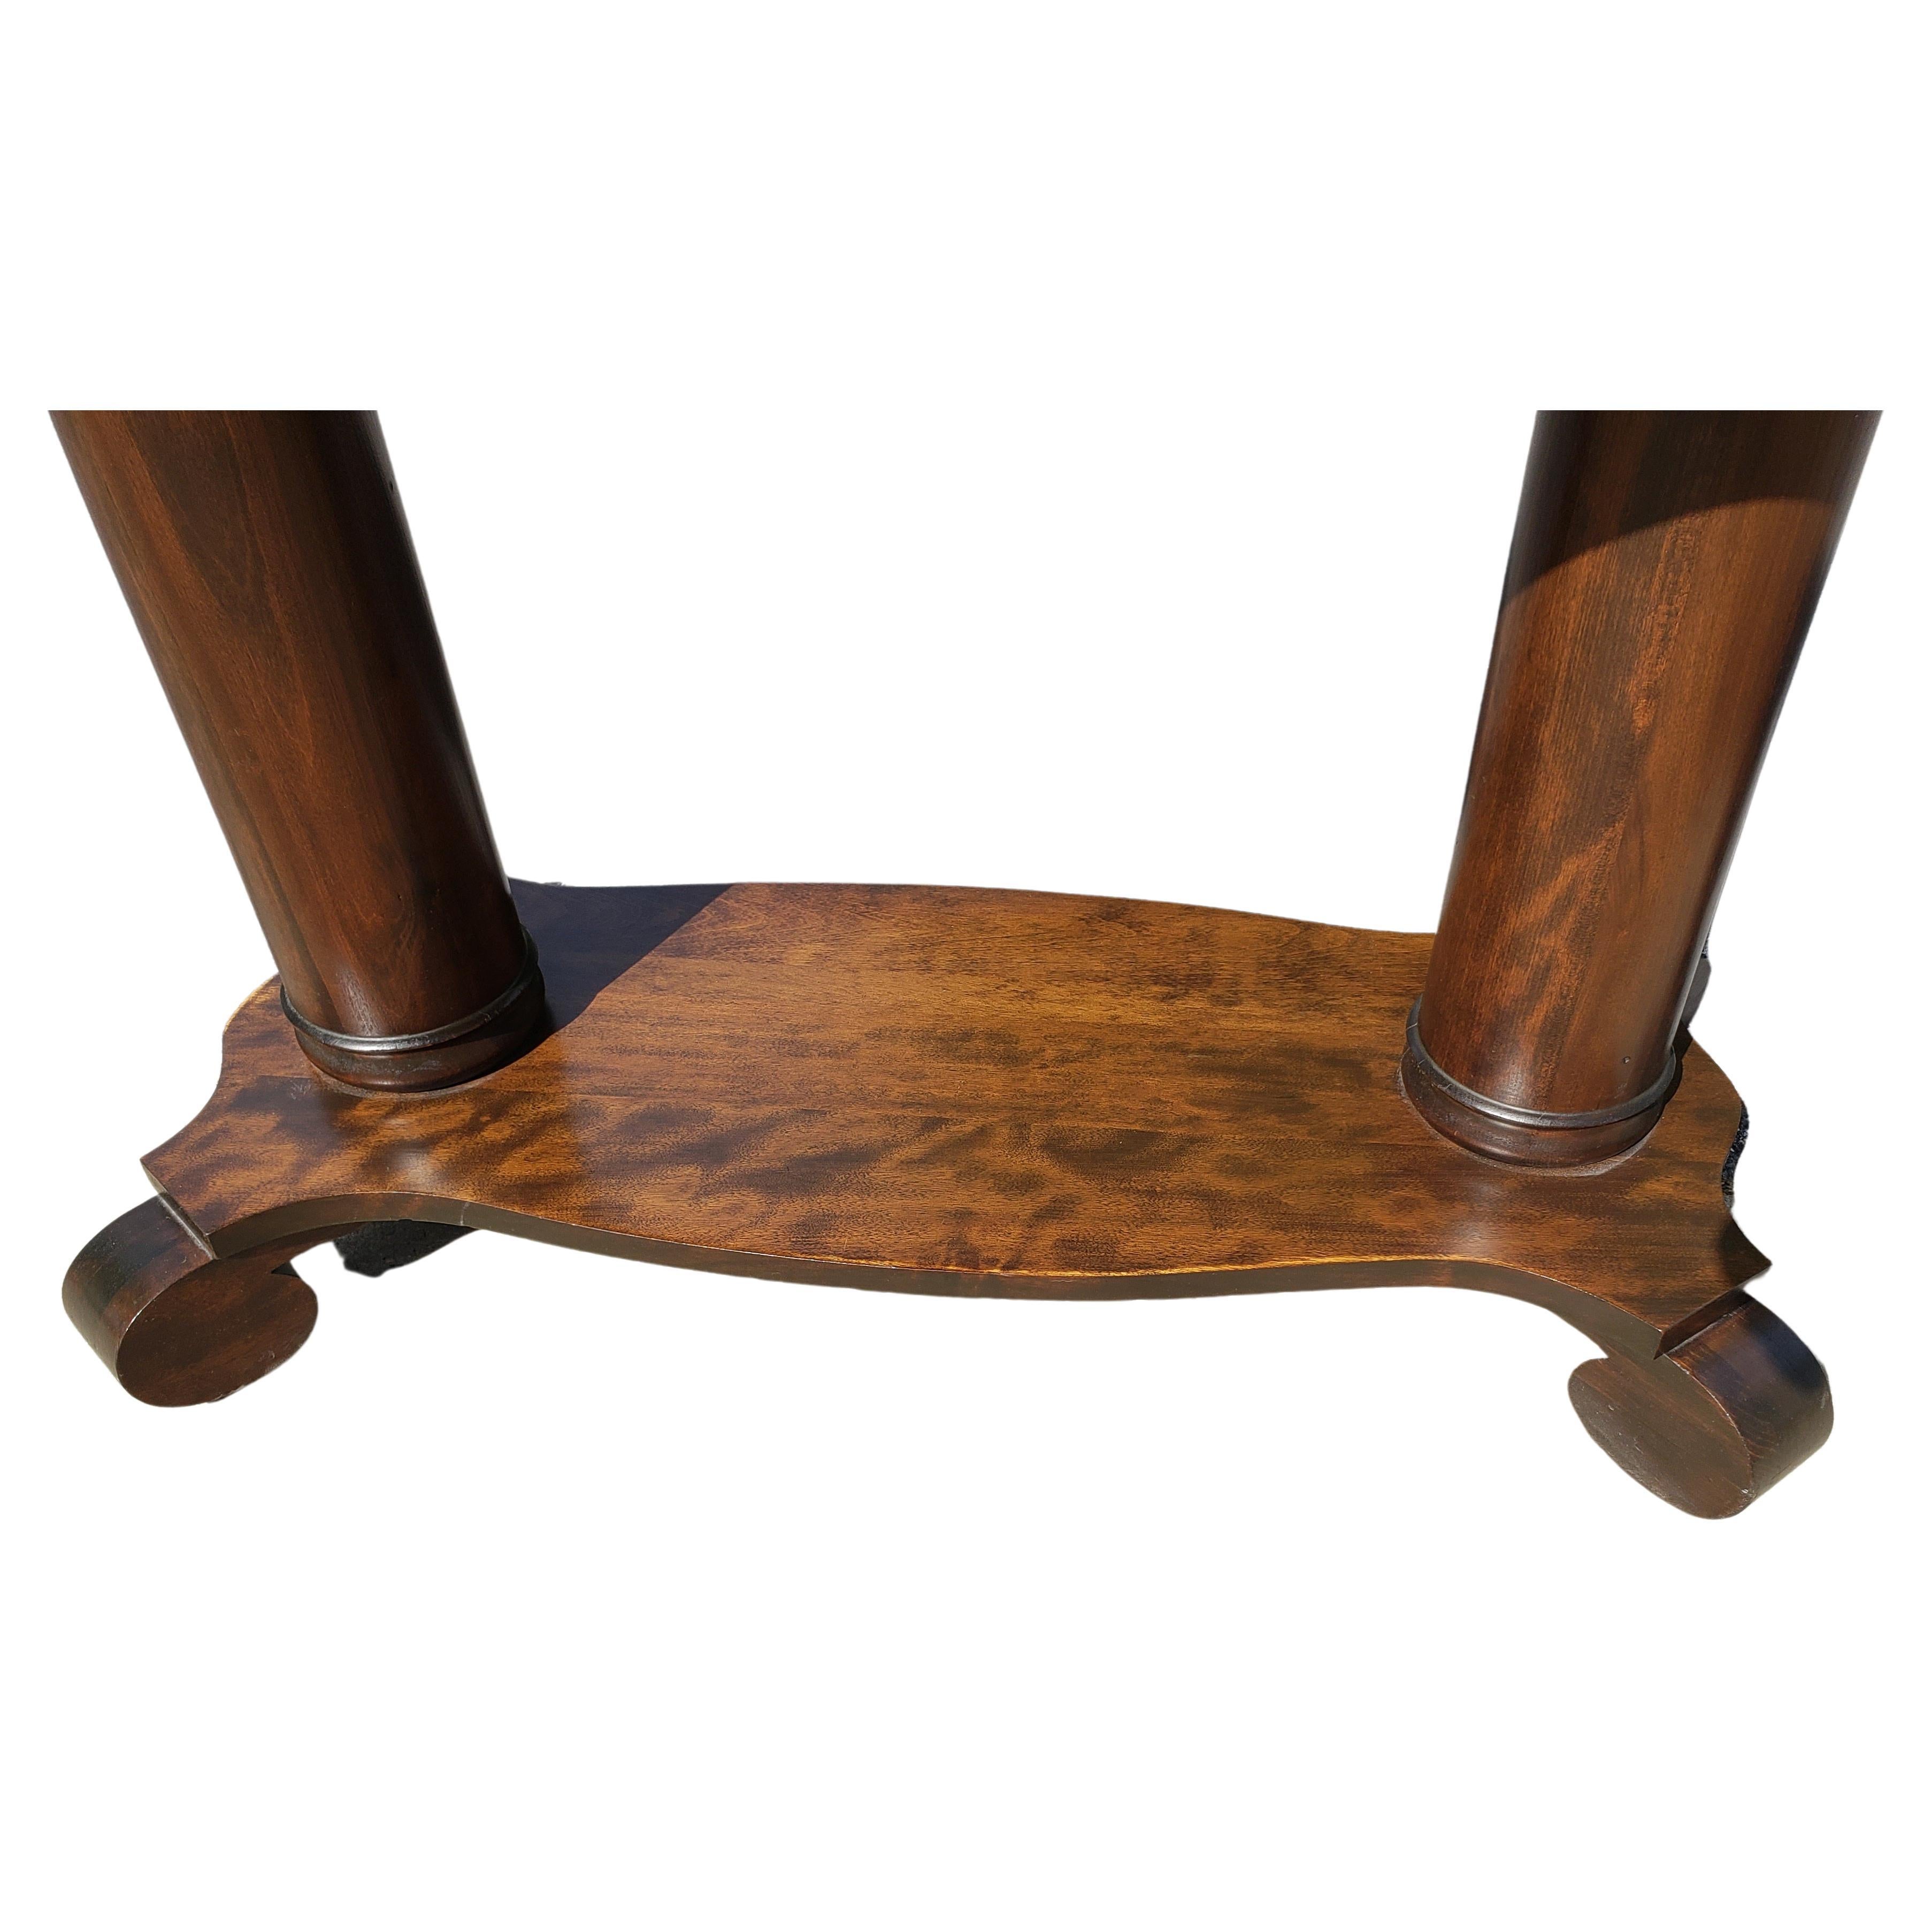 20th Century American Empire Style Oval Stained Oak Library Table For Sale